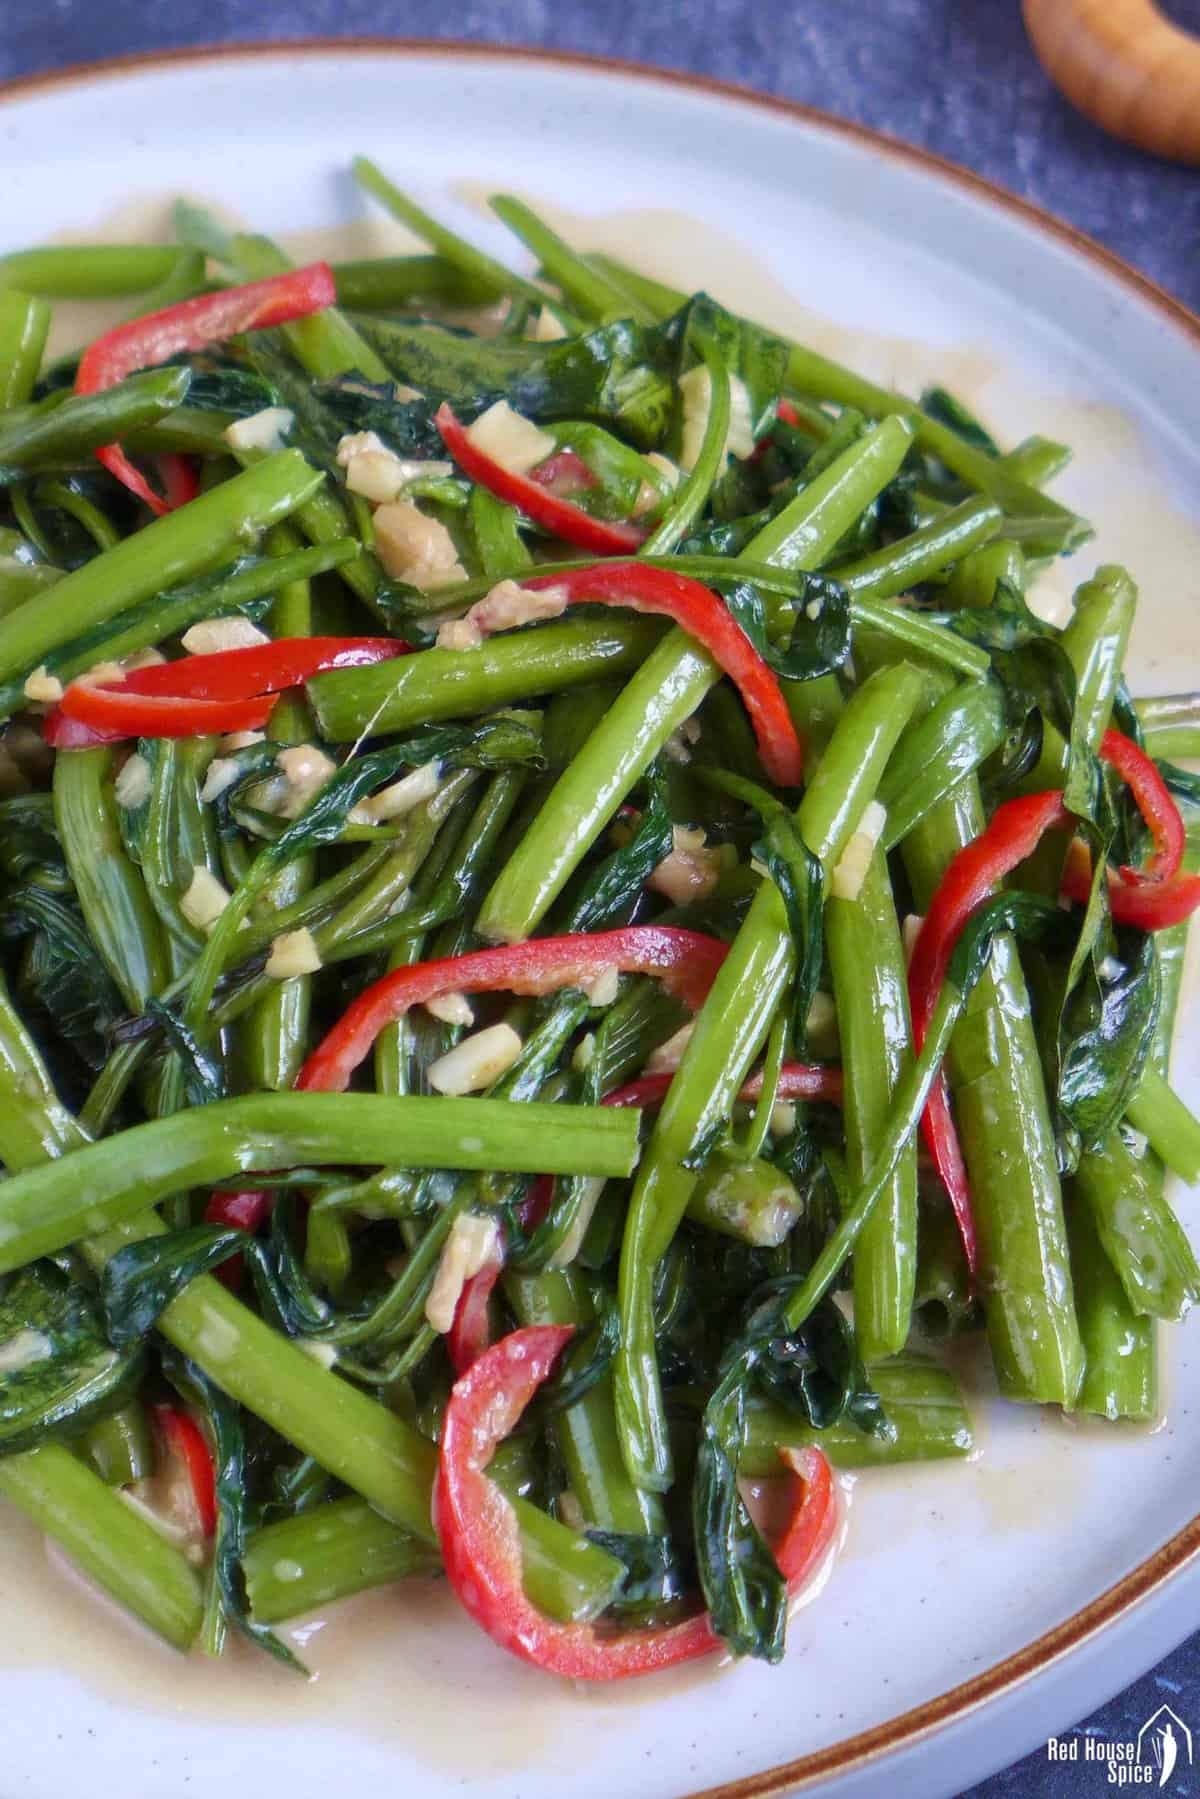 water spinach stir-fry with garlic, chilli and seasonings